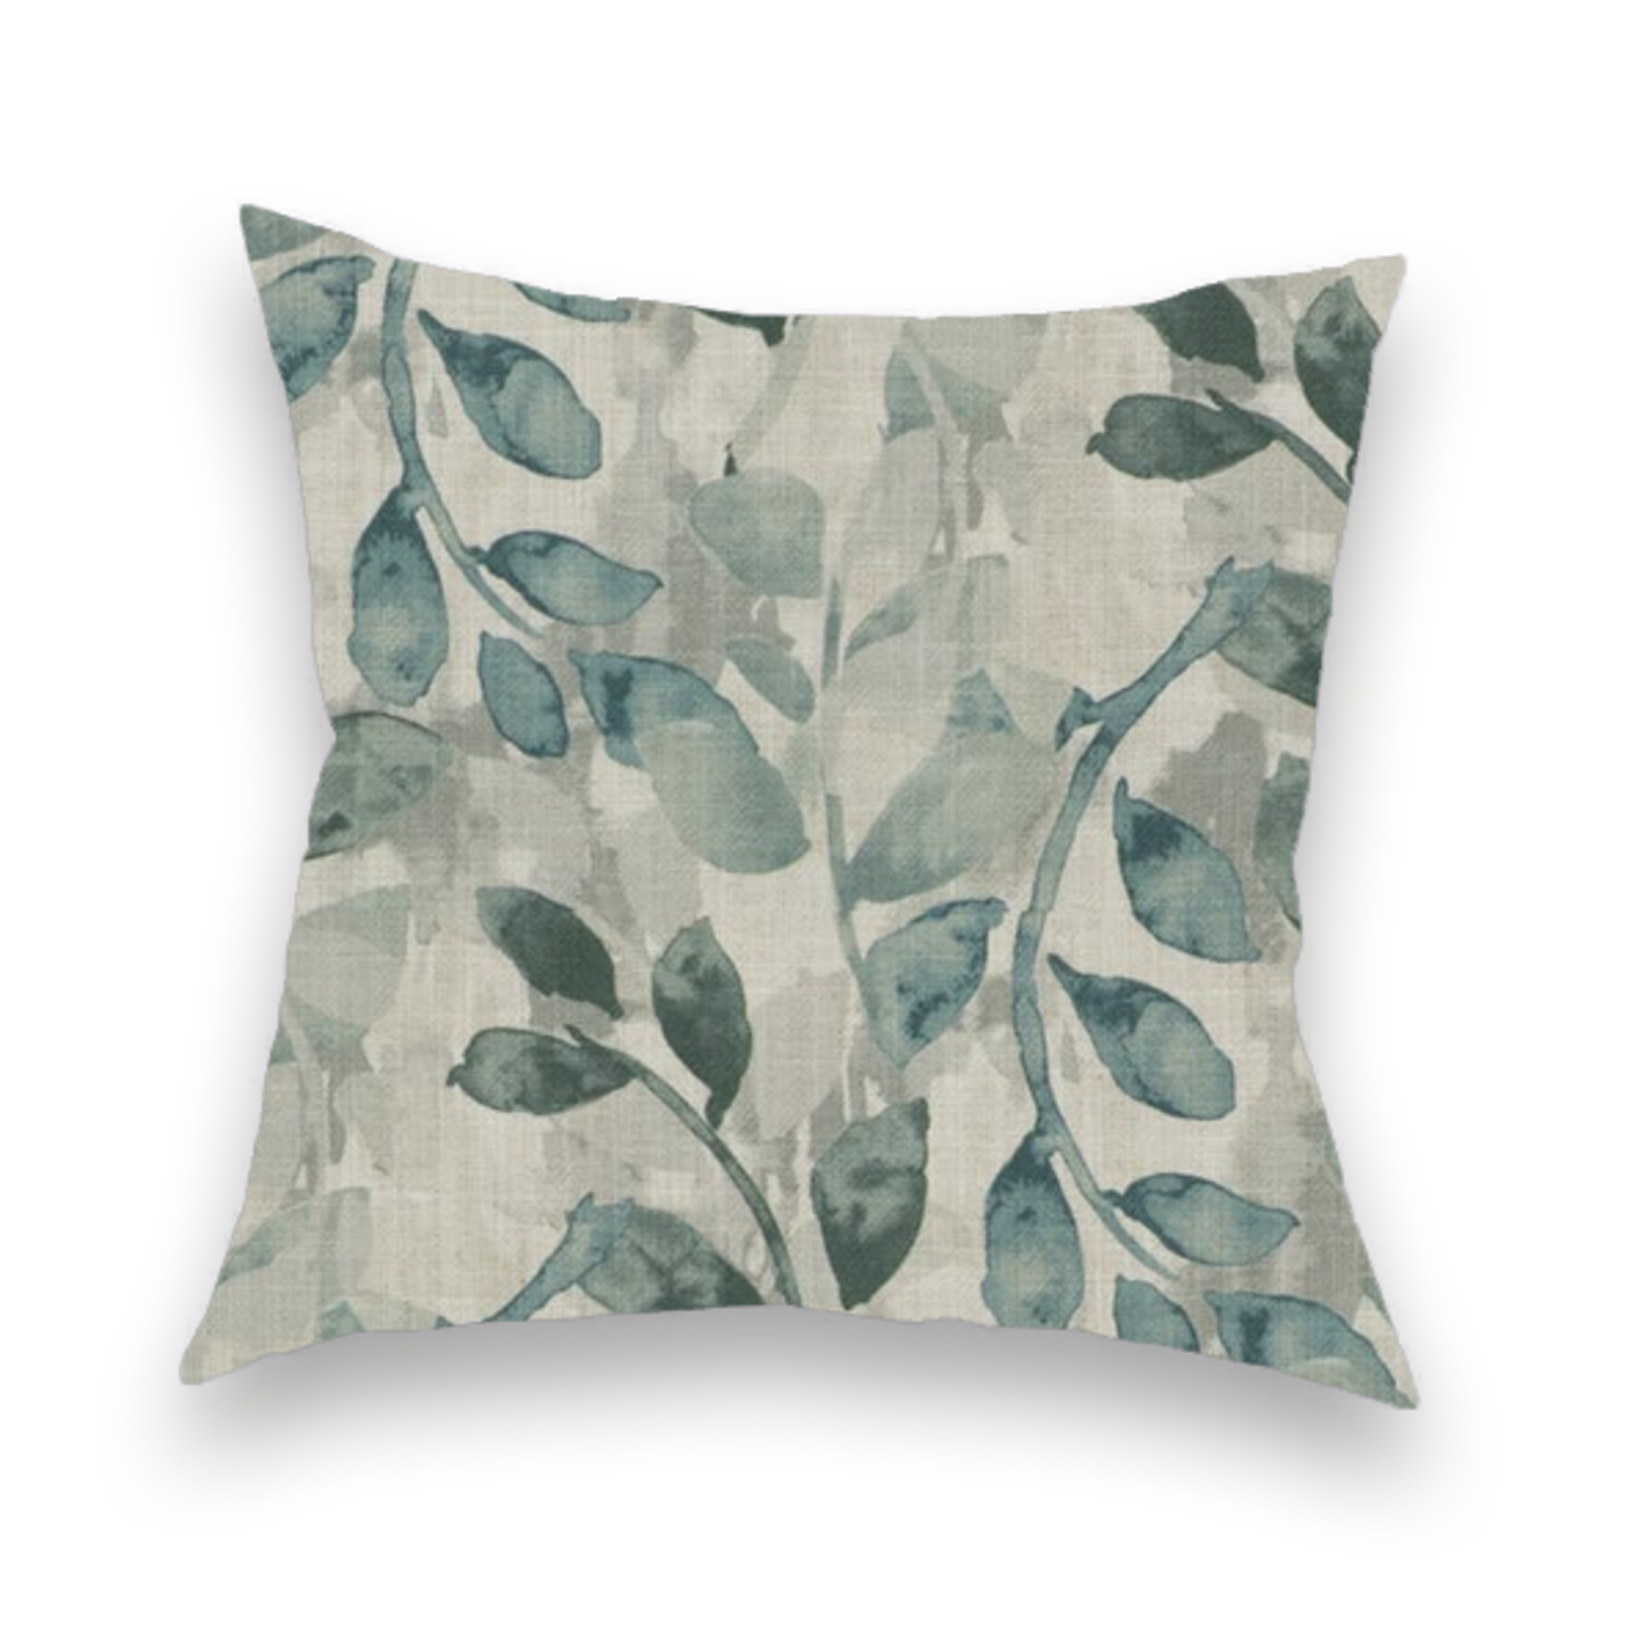 Large Spa Leaf Toss Pillow